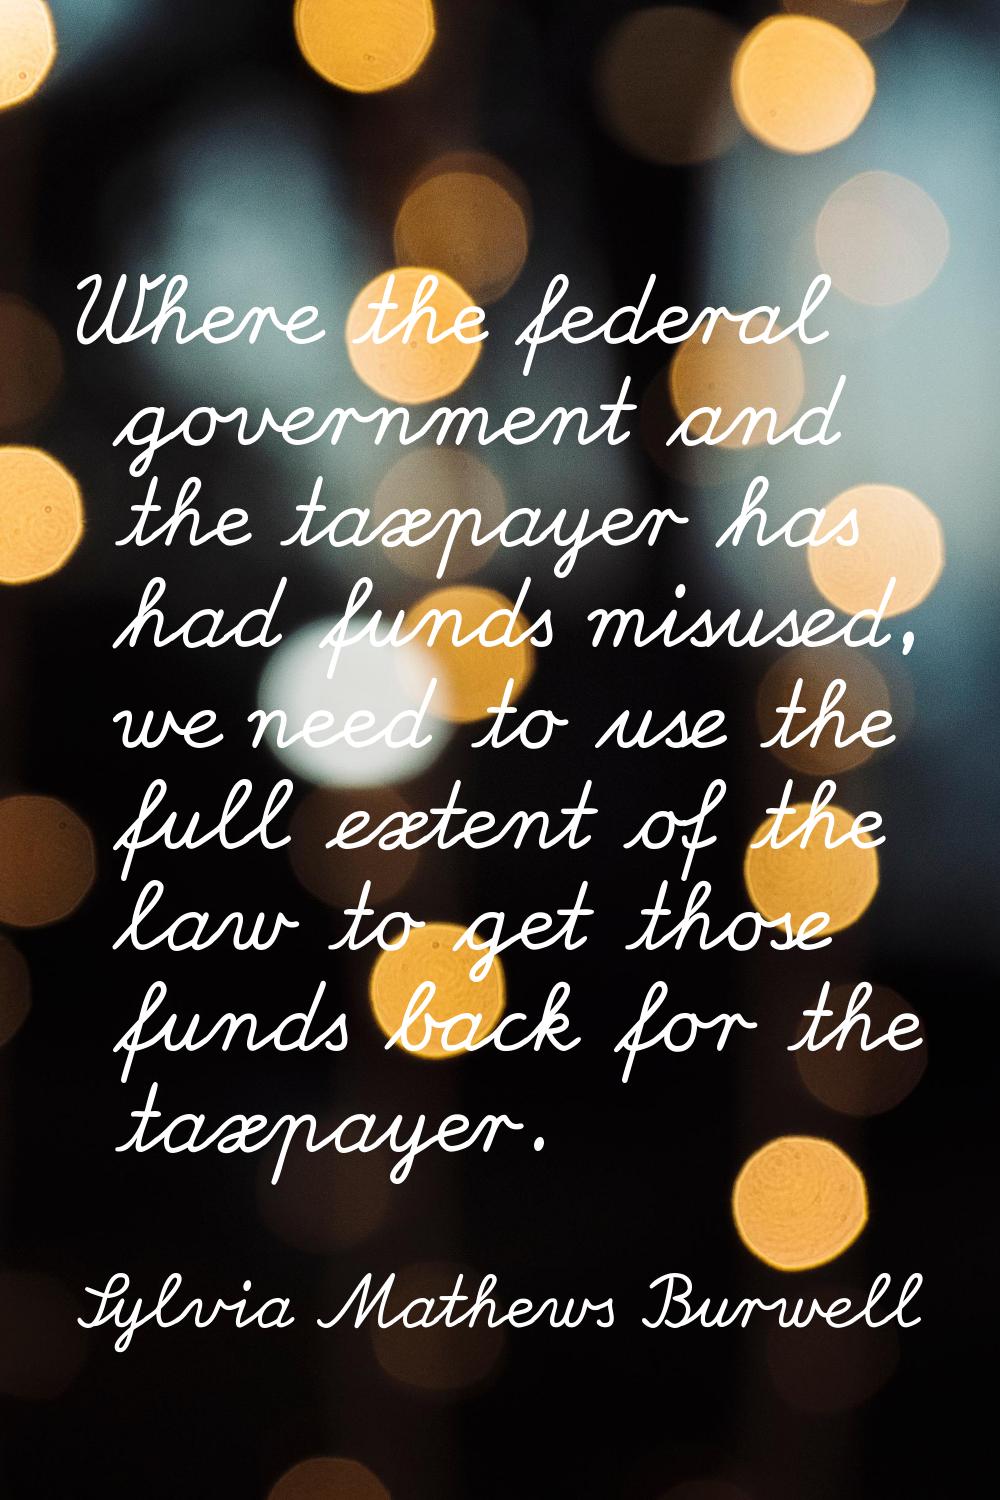 Where the federal government and the taxpayer has had funds misused, we need to use the full extent